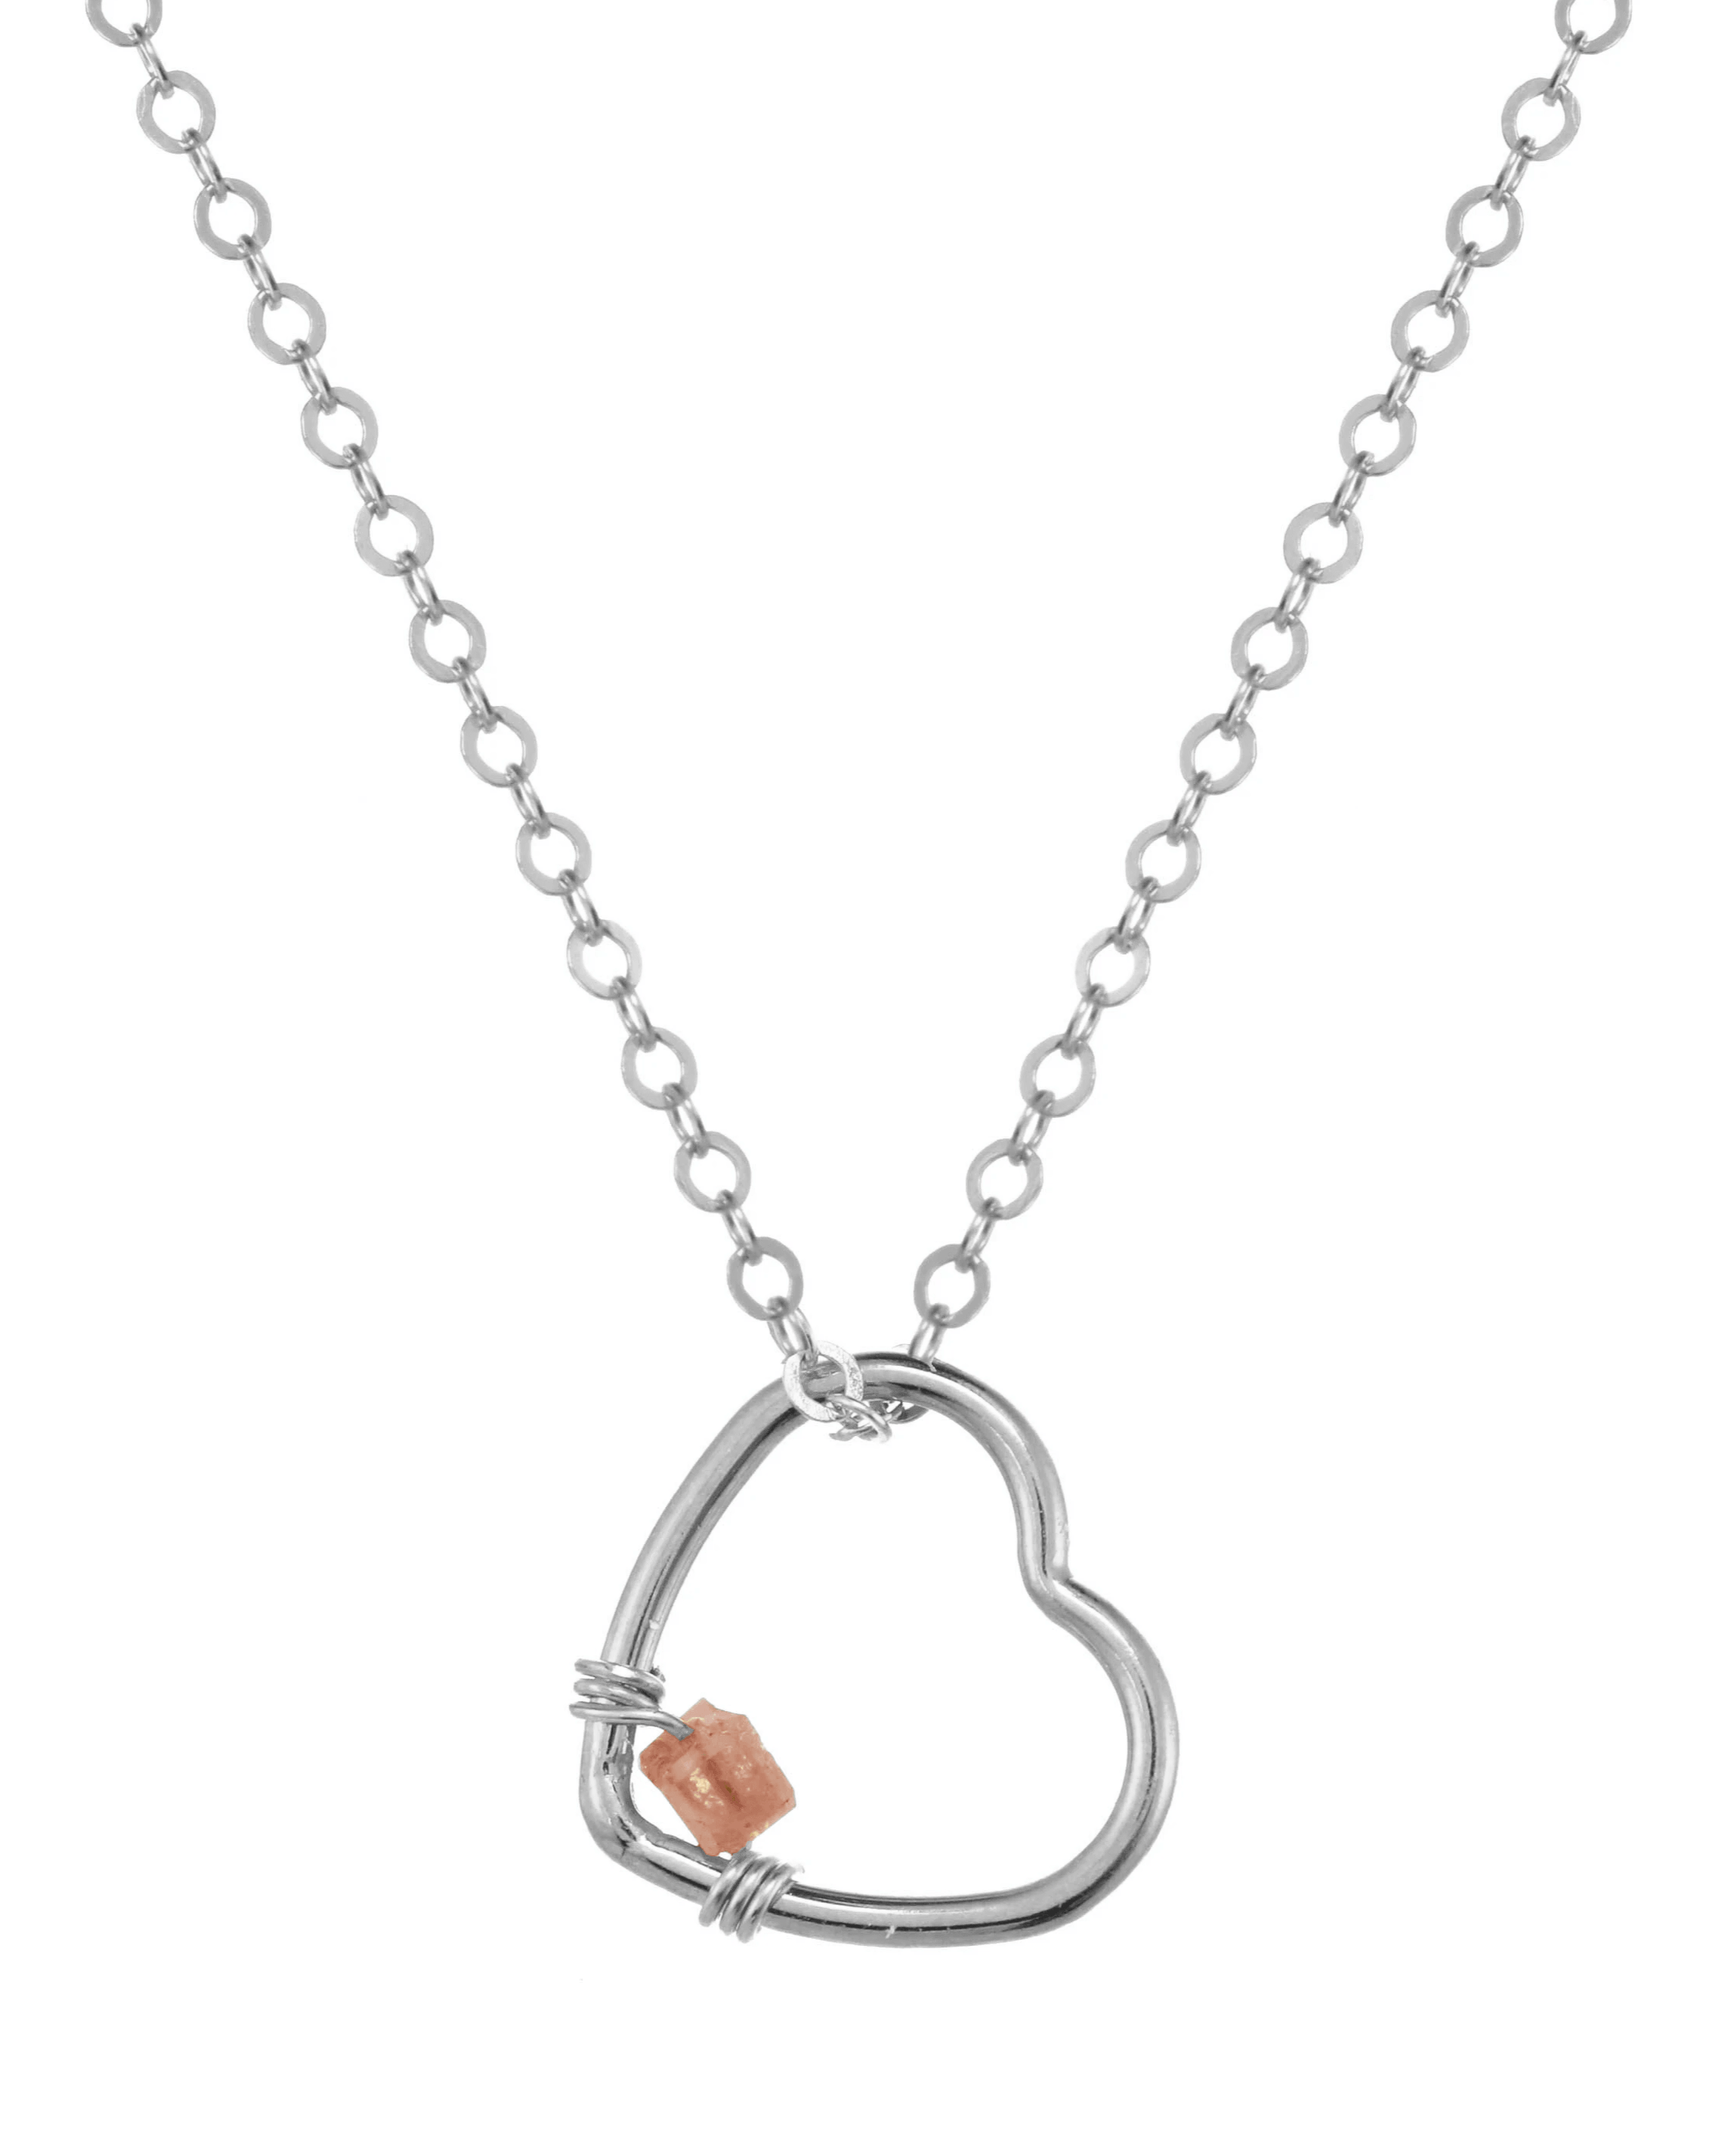 Amorcito Necklace by KOZAKH. A 16 to 18 inch adjustable length necklace in Sterling Silver, featuring a heart shaped charm with a square cut Brown Diamond.